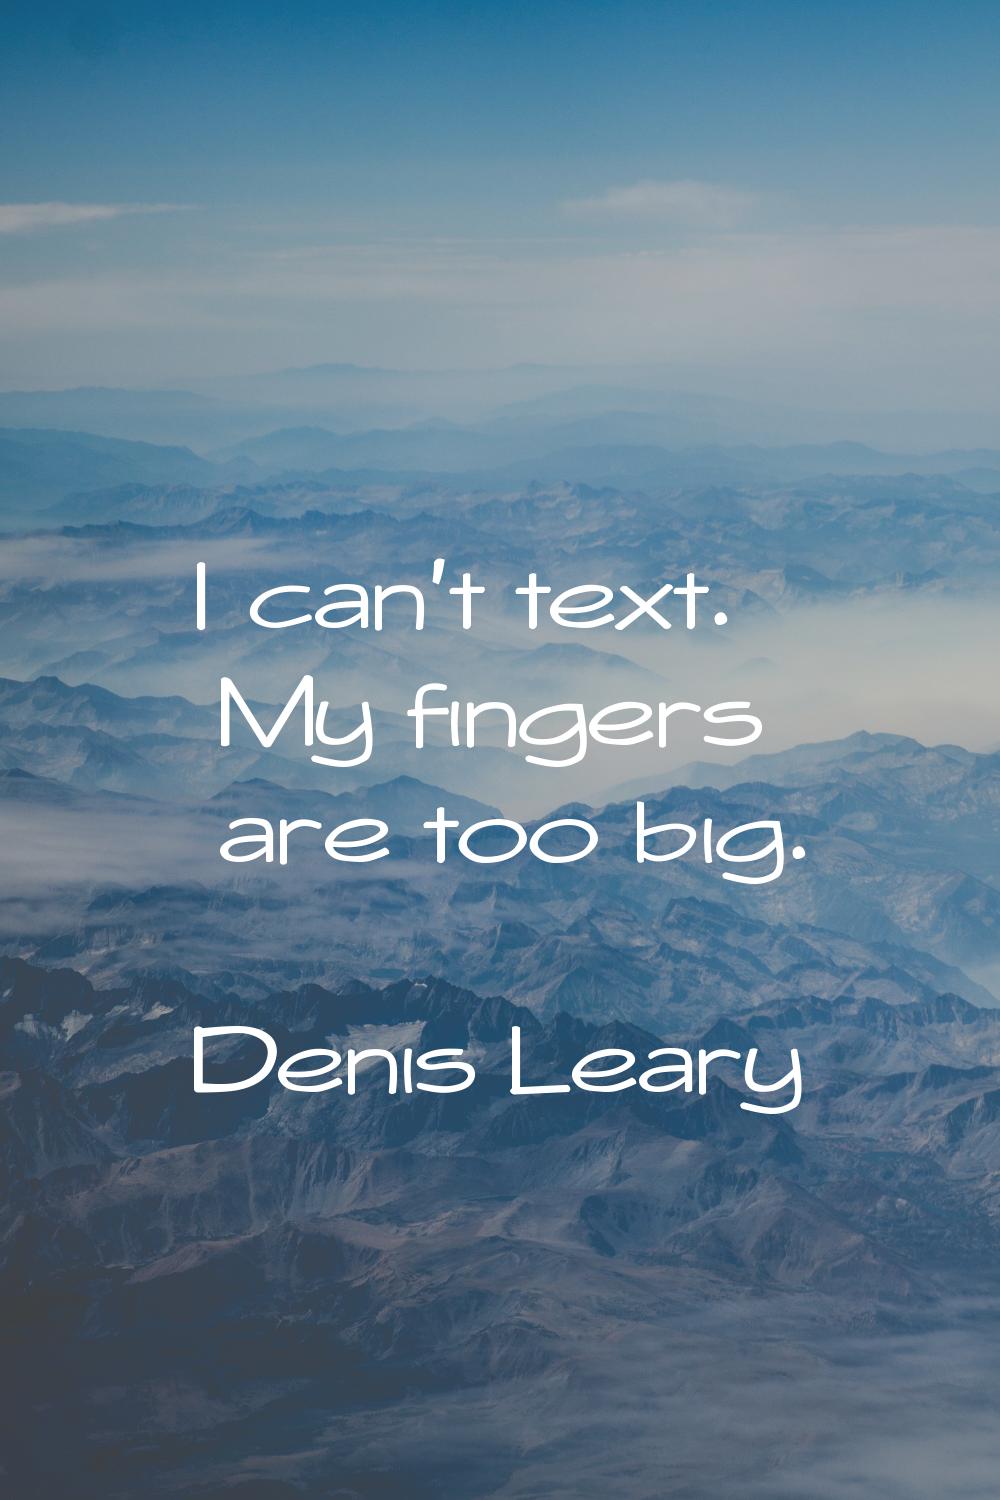 I can't text. My fingers are too big.